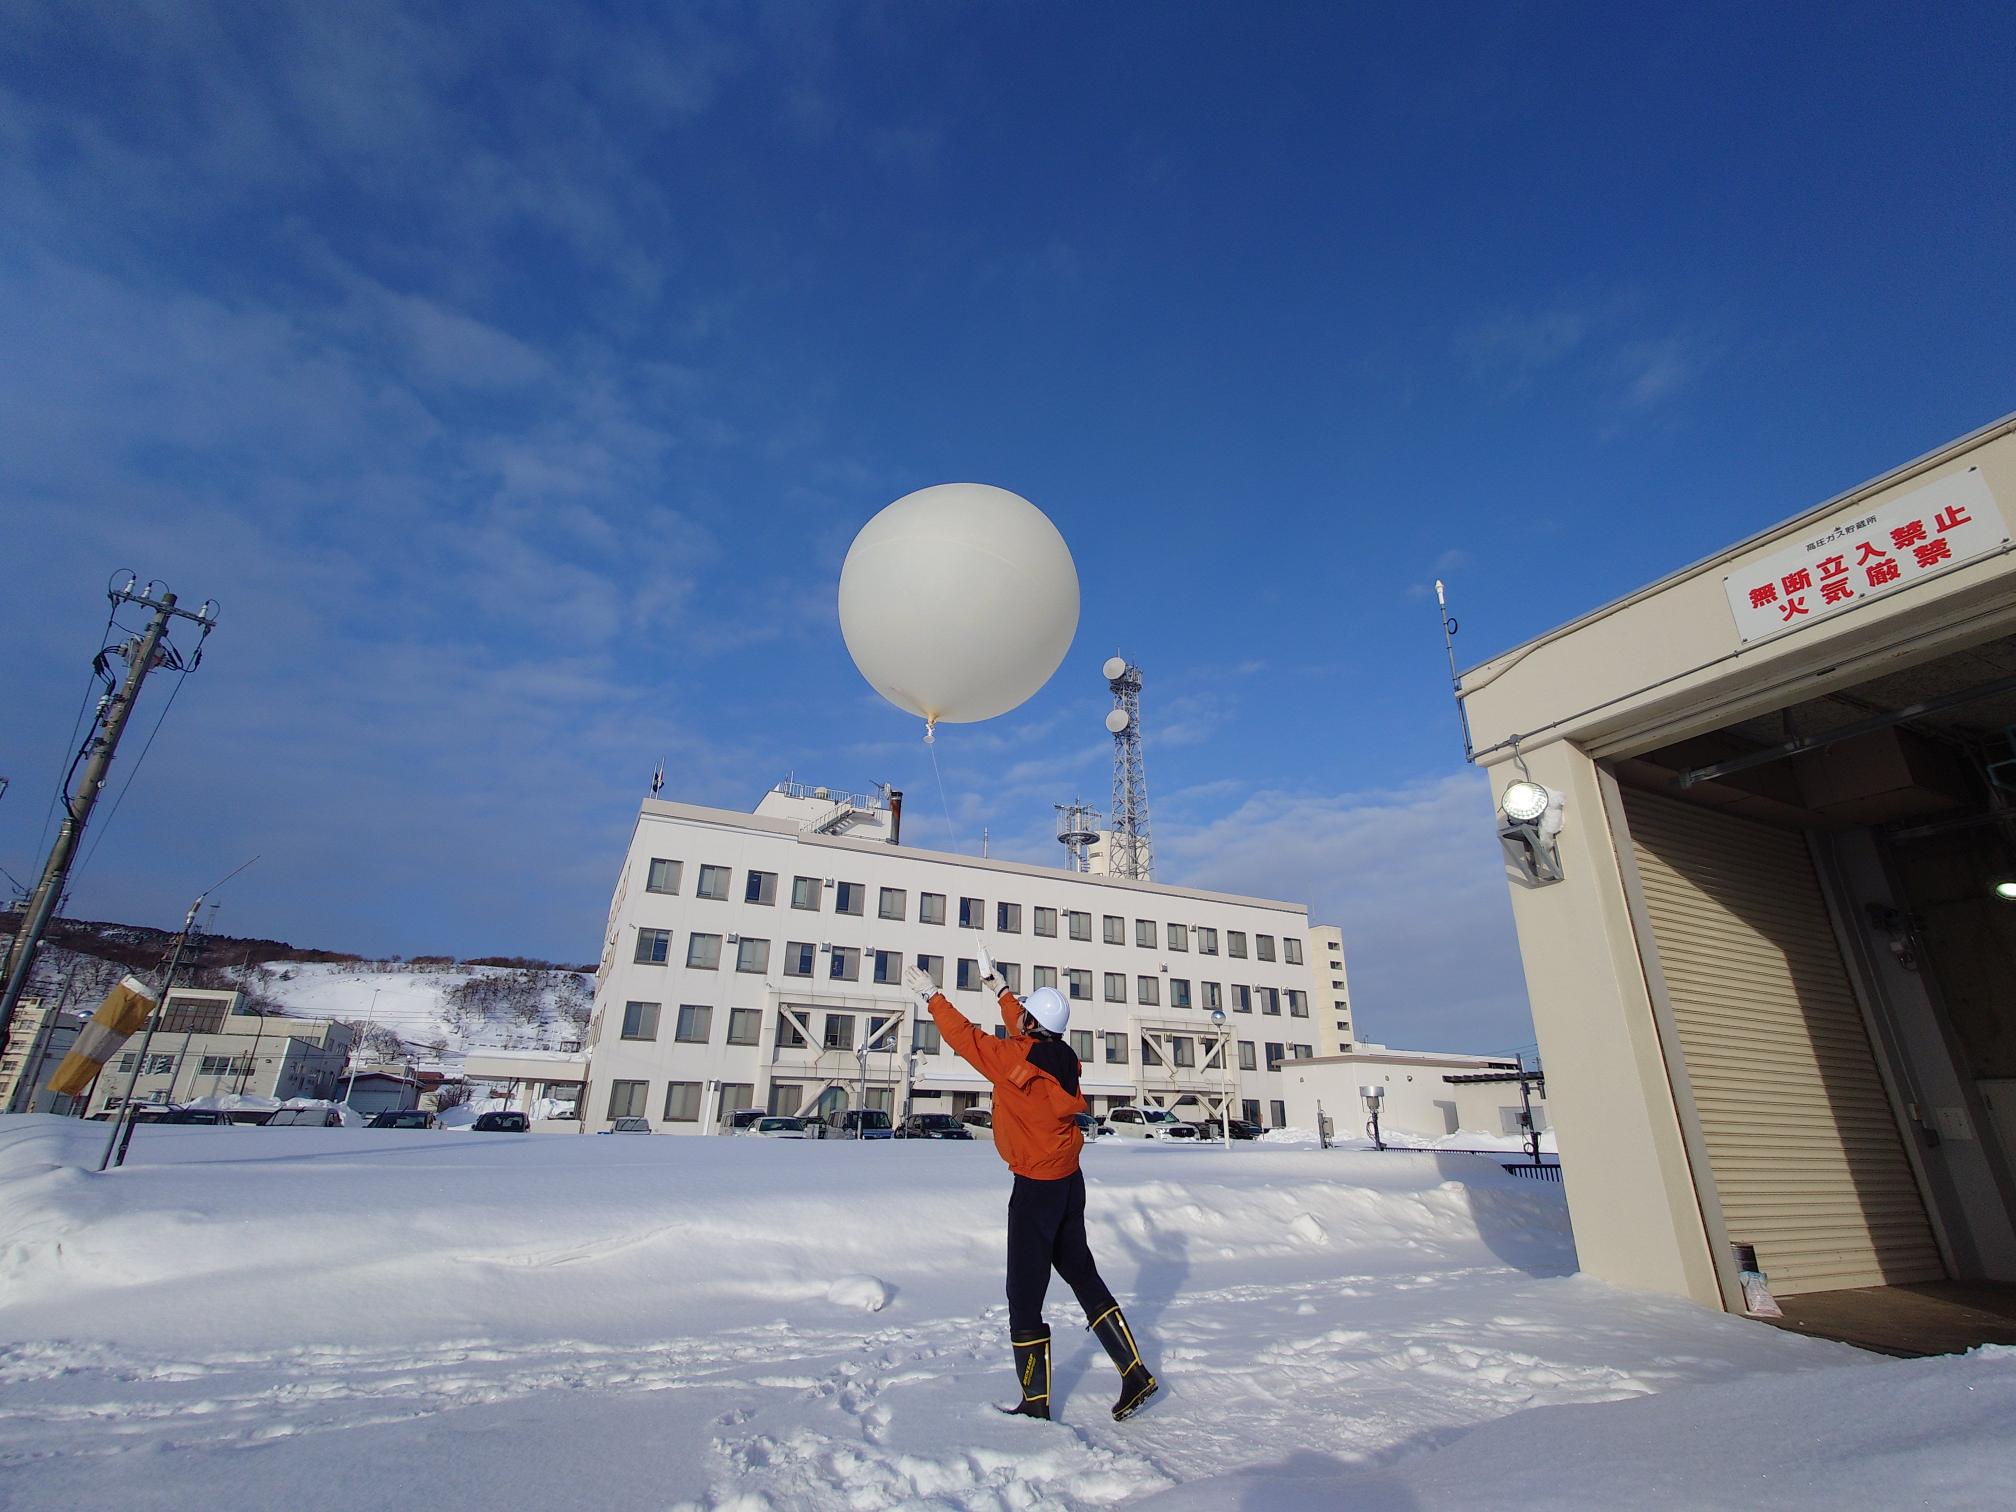 The balloon is launched in the hands of people (MBL: Manned Balloon Launching).